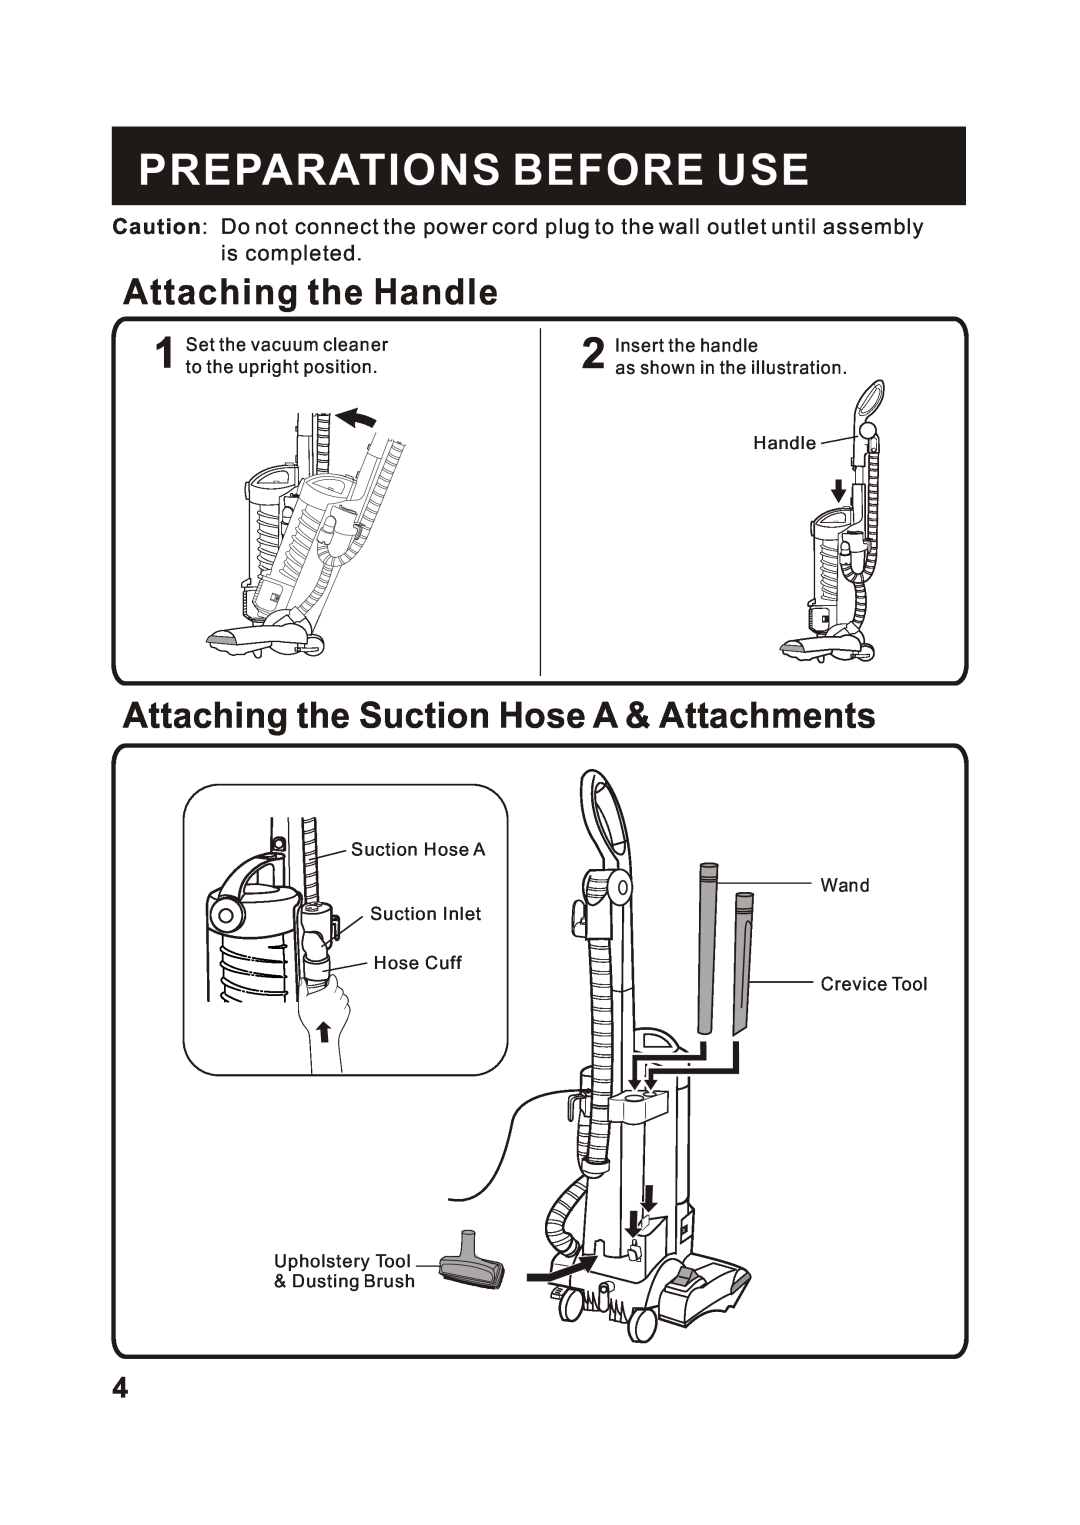 Fantom Vacuum FM741HV Preparations Before Use, Attaching the Handle, Attaching the Suction Hose A & Attachments 